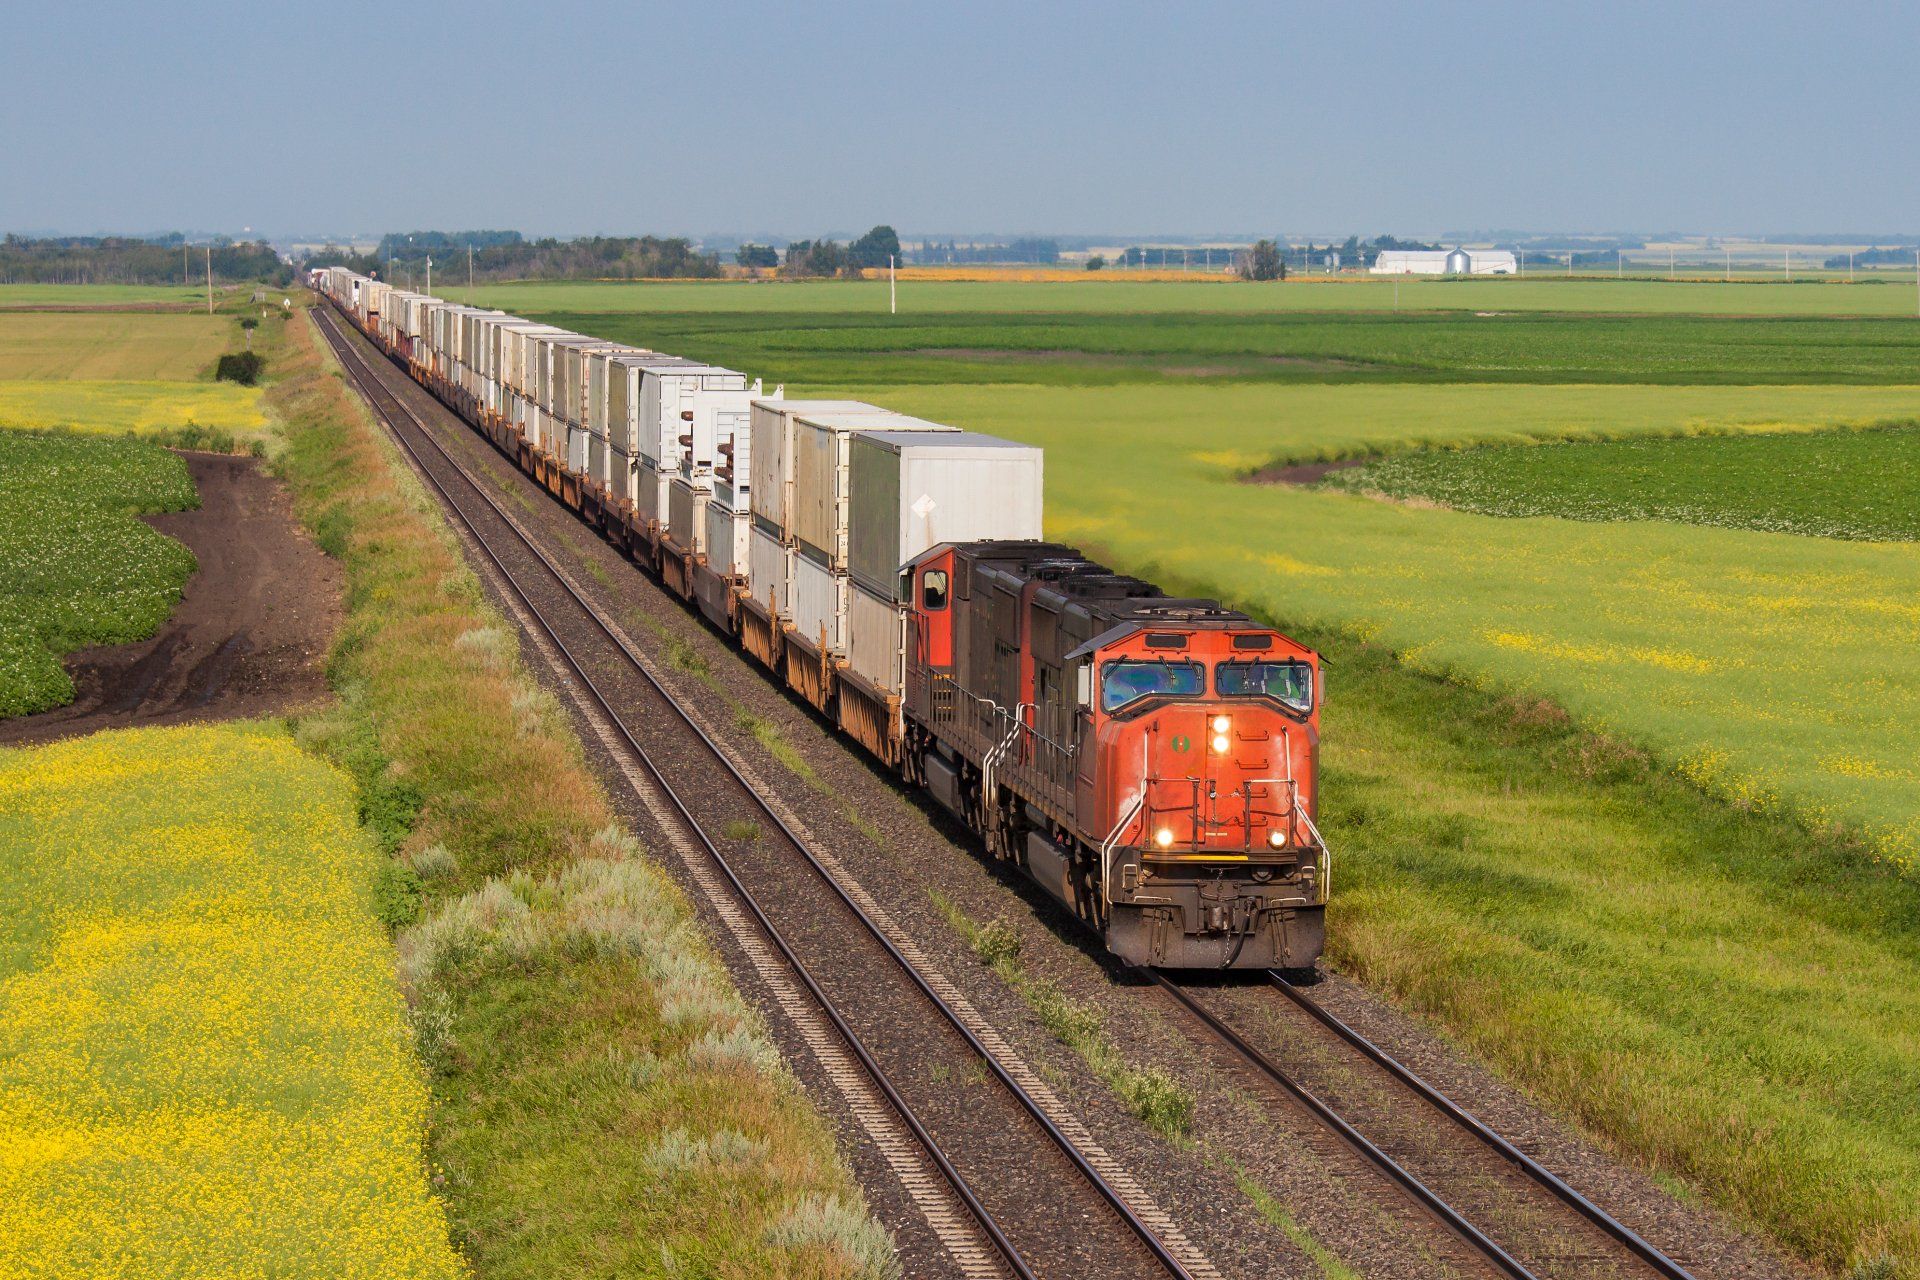 Container train on one of two tracks crossing colorful prairie